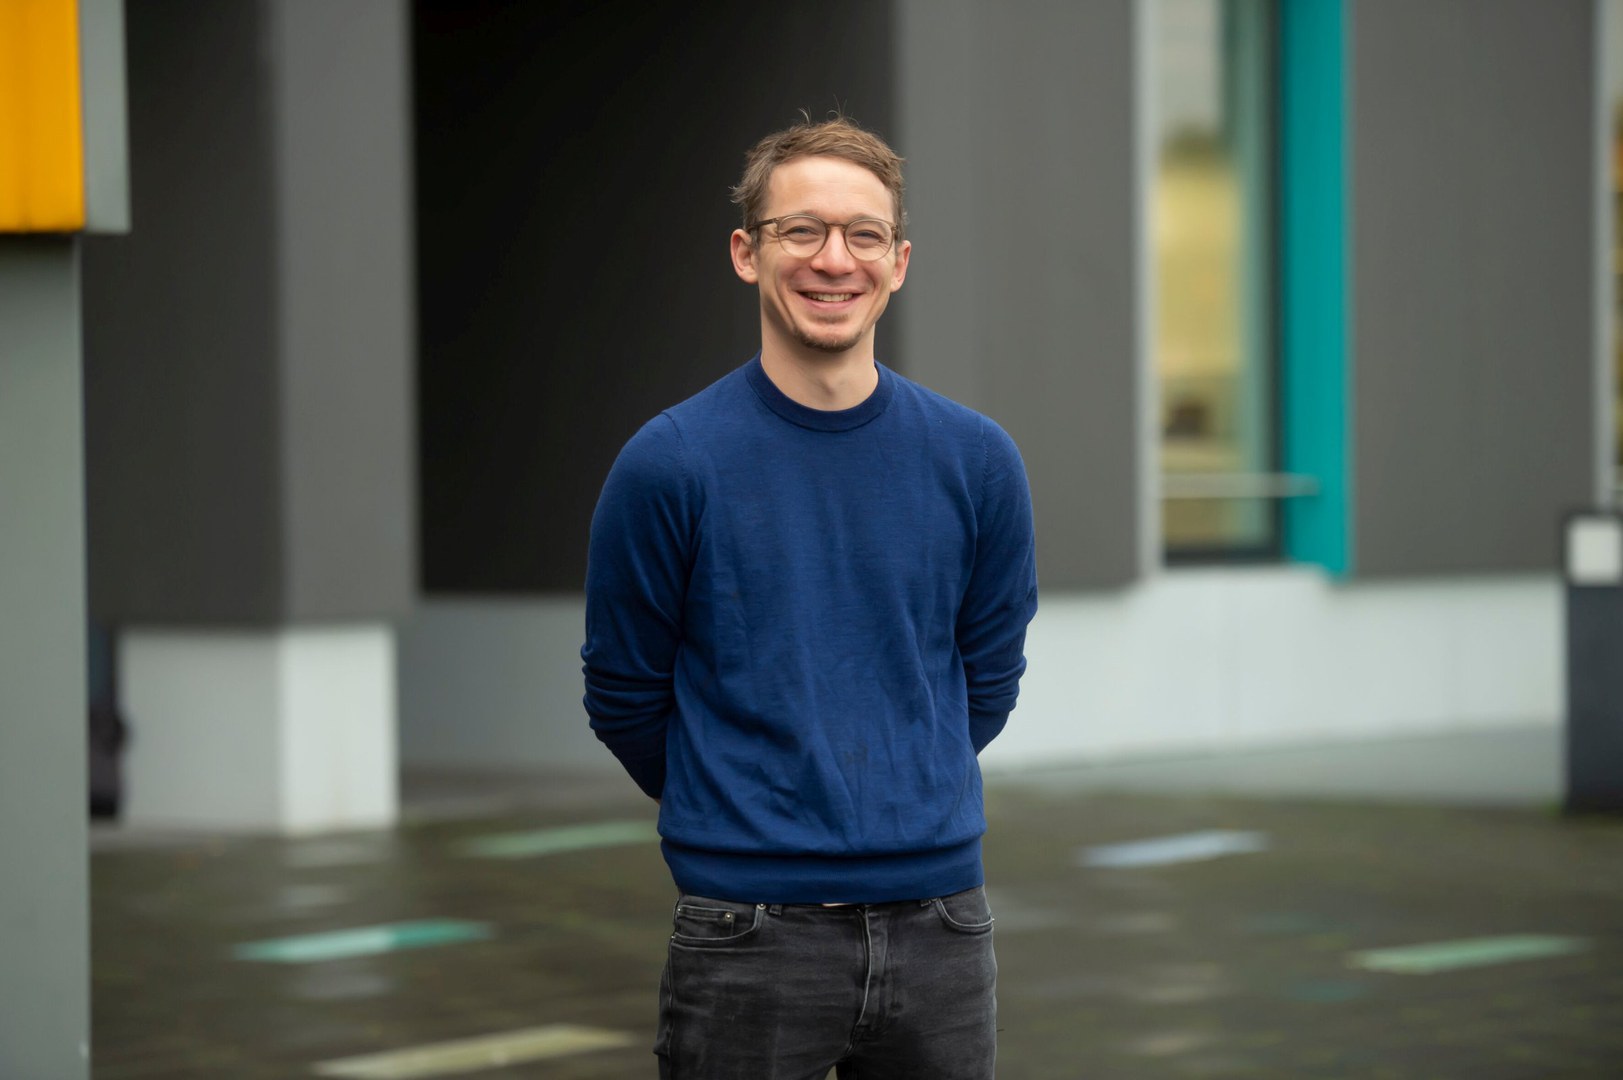 Professor Andreas Schlitzer - from LIMES at the University of Bonn is studying immune cells together with his working group.